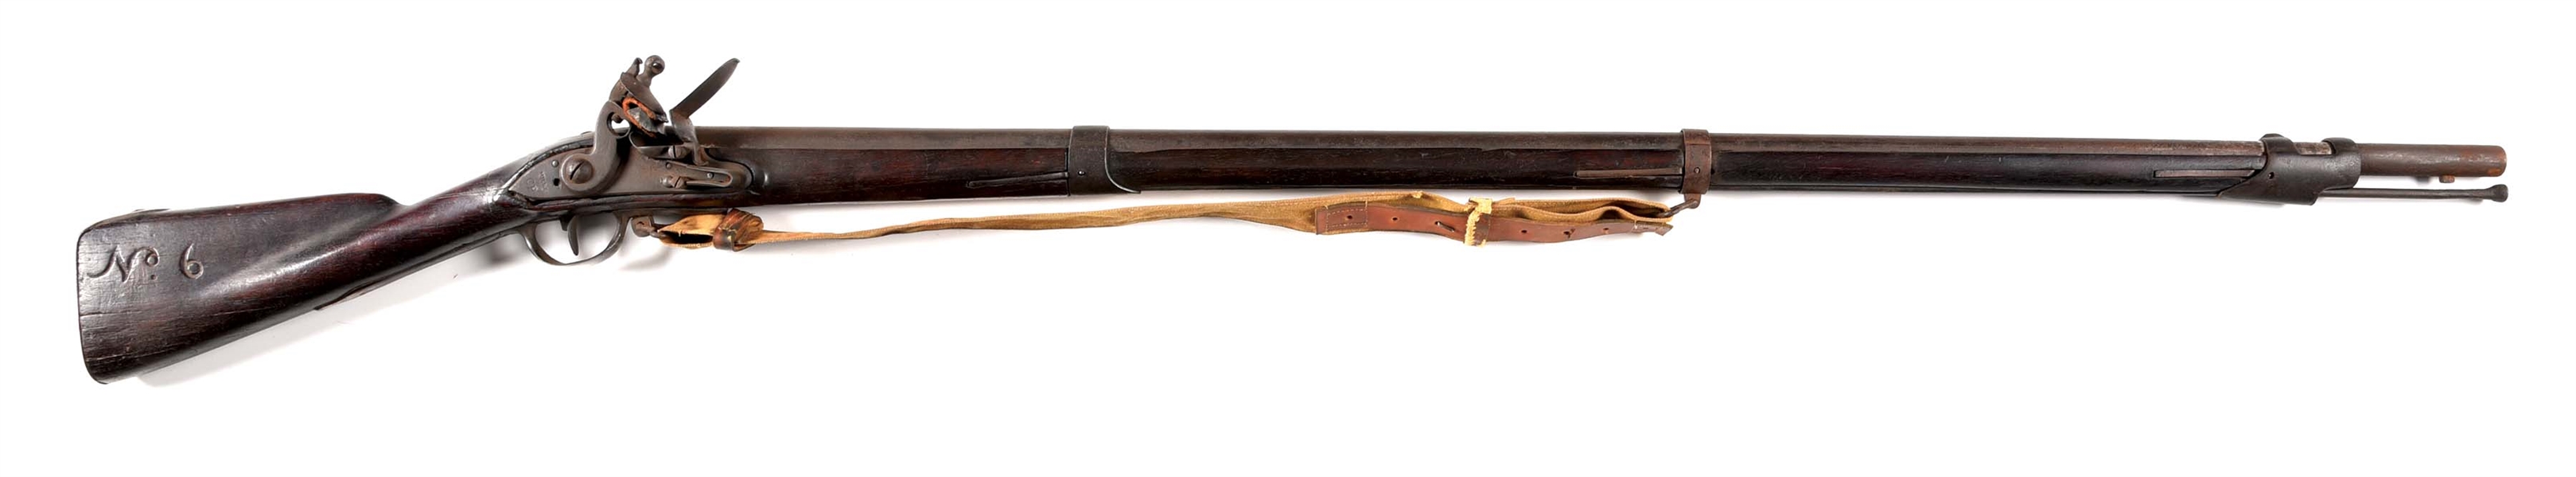 (A) 1797 COMMONWEALTH OF PENNSYLVANIA FLINTLOCK MUSKET BY MILES.